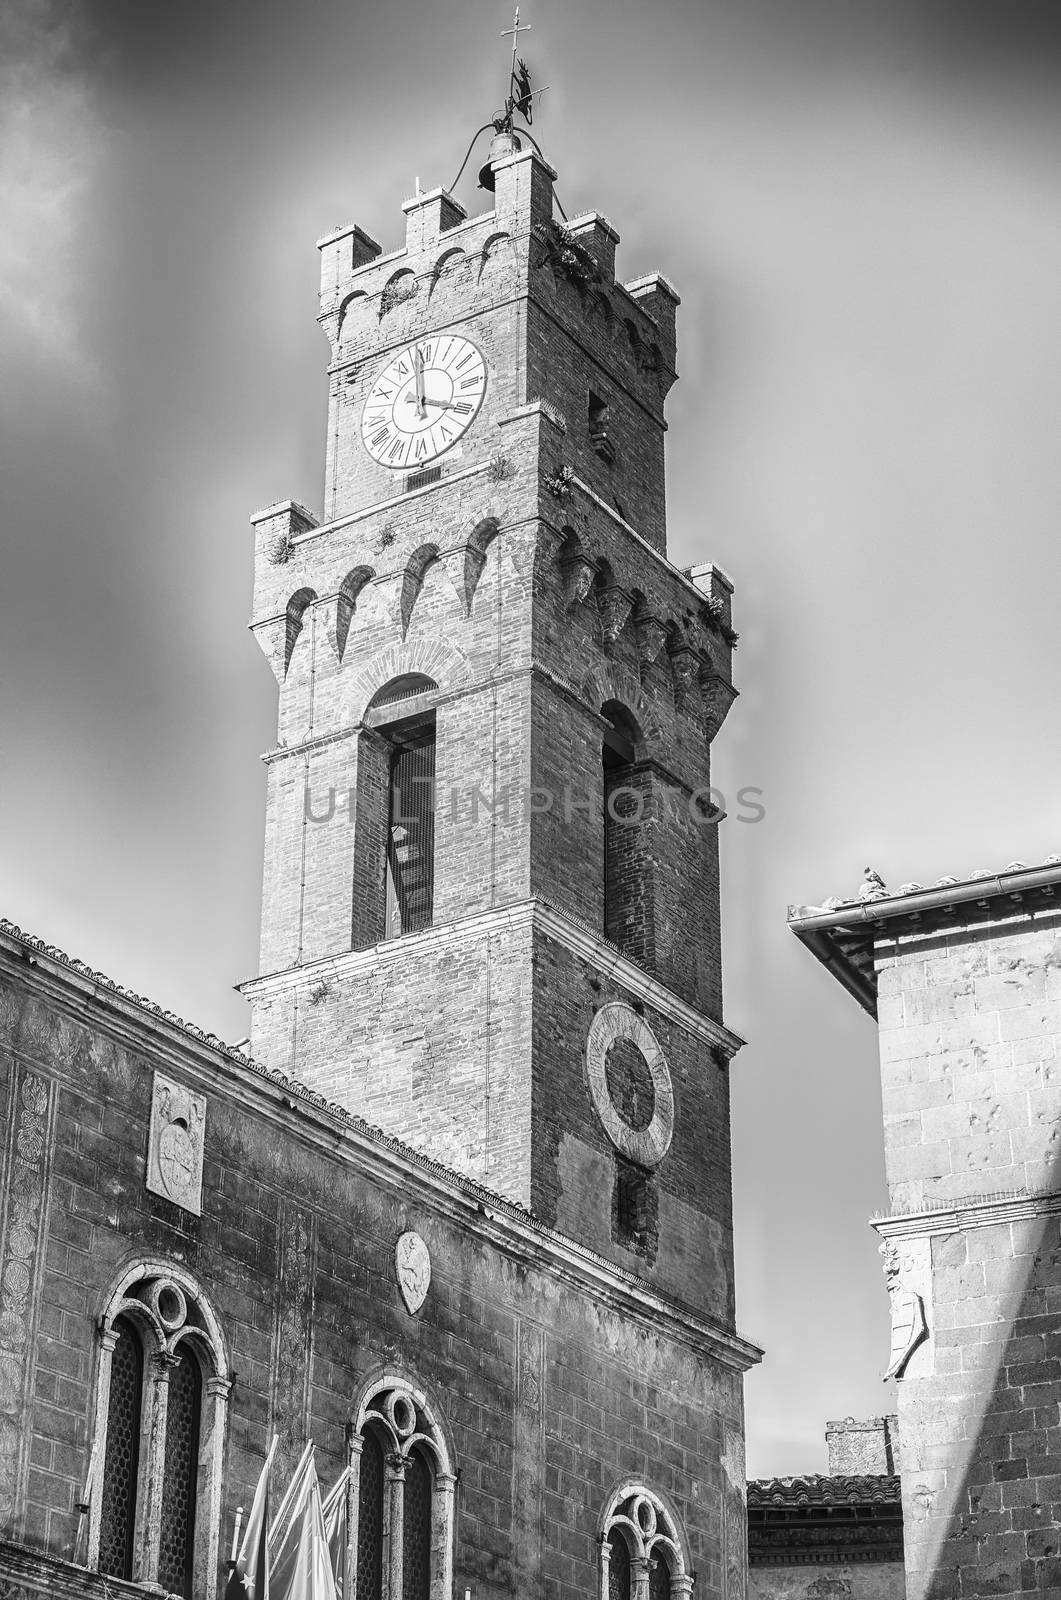 Clocktower of the Town Hall of Pienza, Tuscany, Italy. It is located in Piazza Pio II, the pope whose name was given to the city: Pienza means in fact "City of Pius"